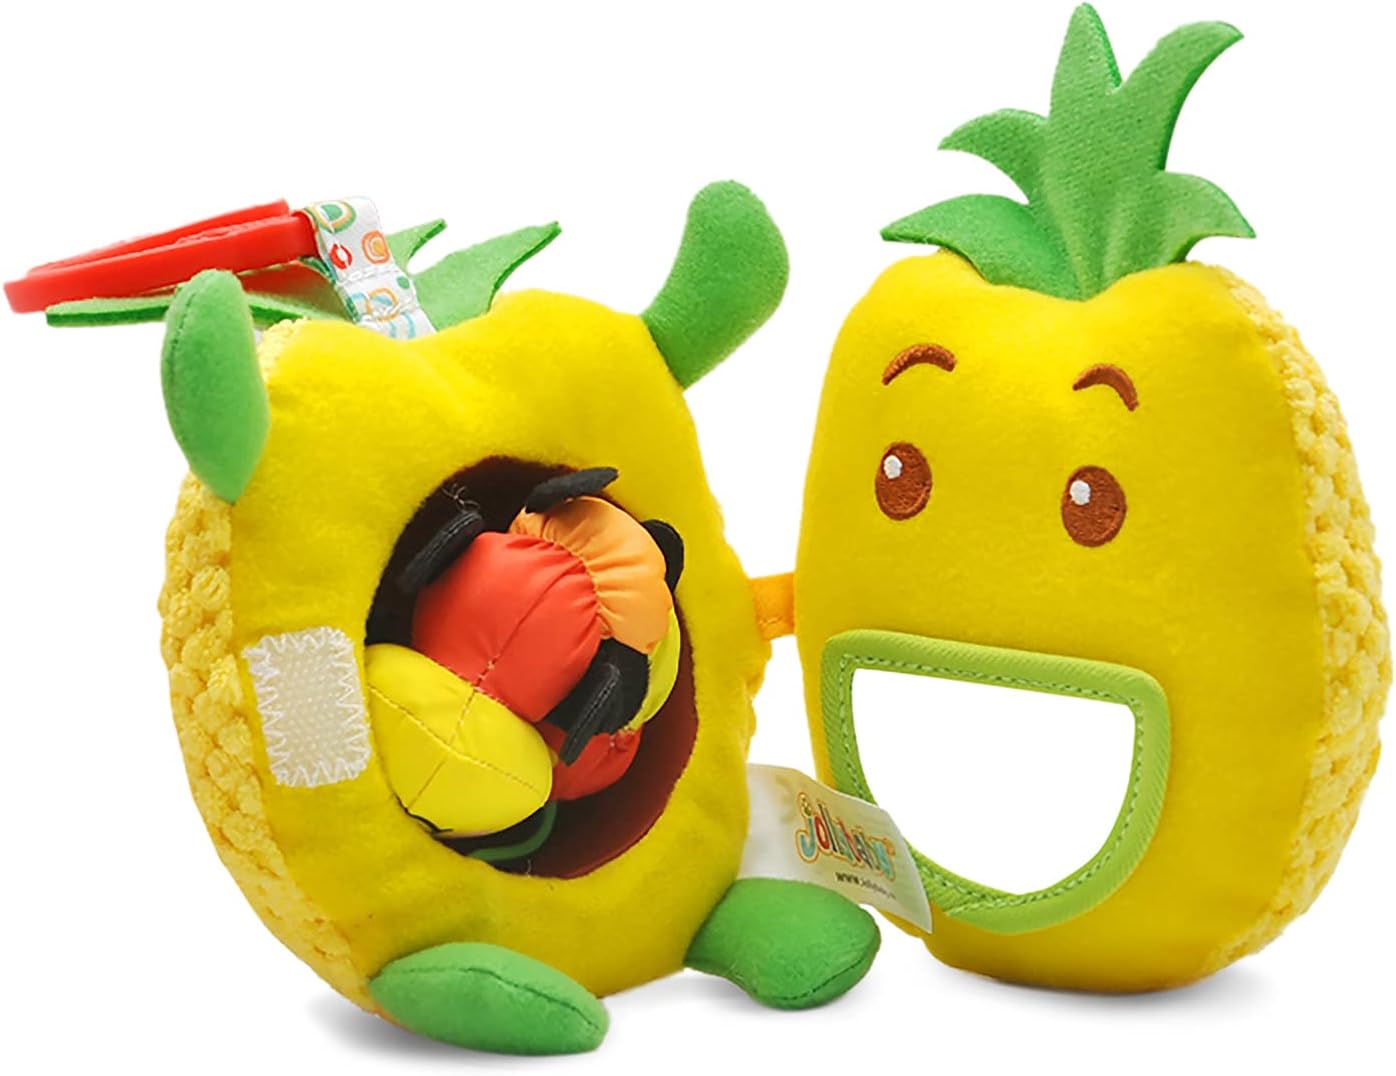 Baby Plush Fruit Doll Toys, Caterpillar Eating Fruit Stuffed Cartoon Snuggle Travel Activity Toy with Rattle, Gift for Infant boy & Girl 3 Months+(Avocado Squish)